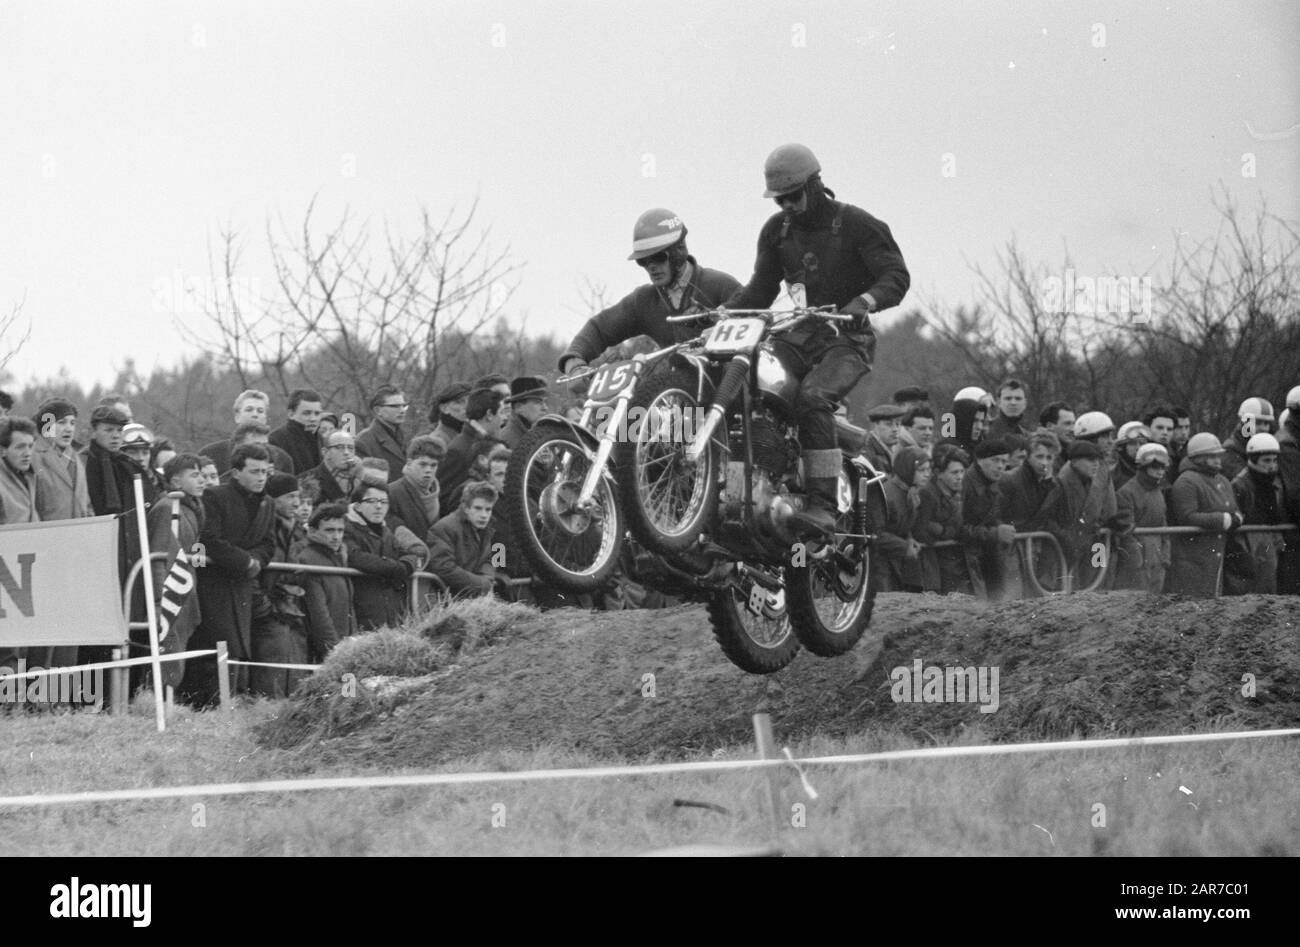 Opening Motorcross season and country match Netherlands against Belgium,  Rob Selling (number 14), Van Ham (number 32) Date: February 25, 1962  Keywords: MOTOCROSS, openings Personal name: Selling, Rob Stock Photo -  Alamy